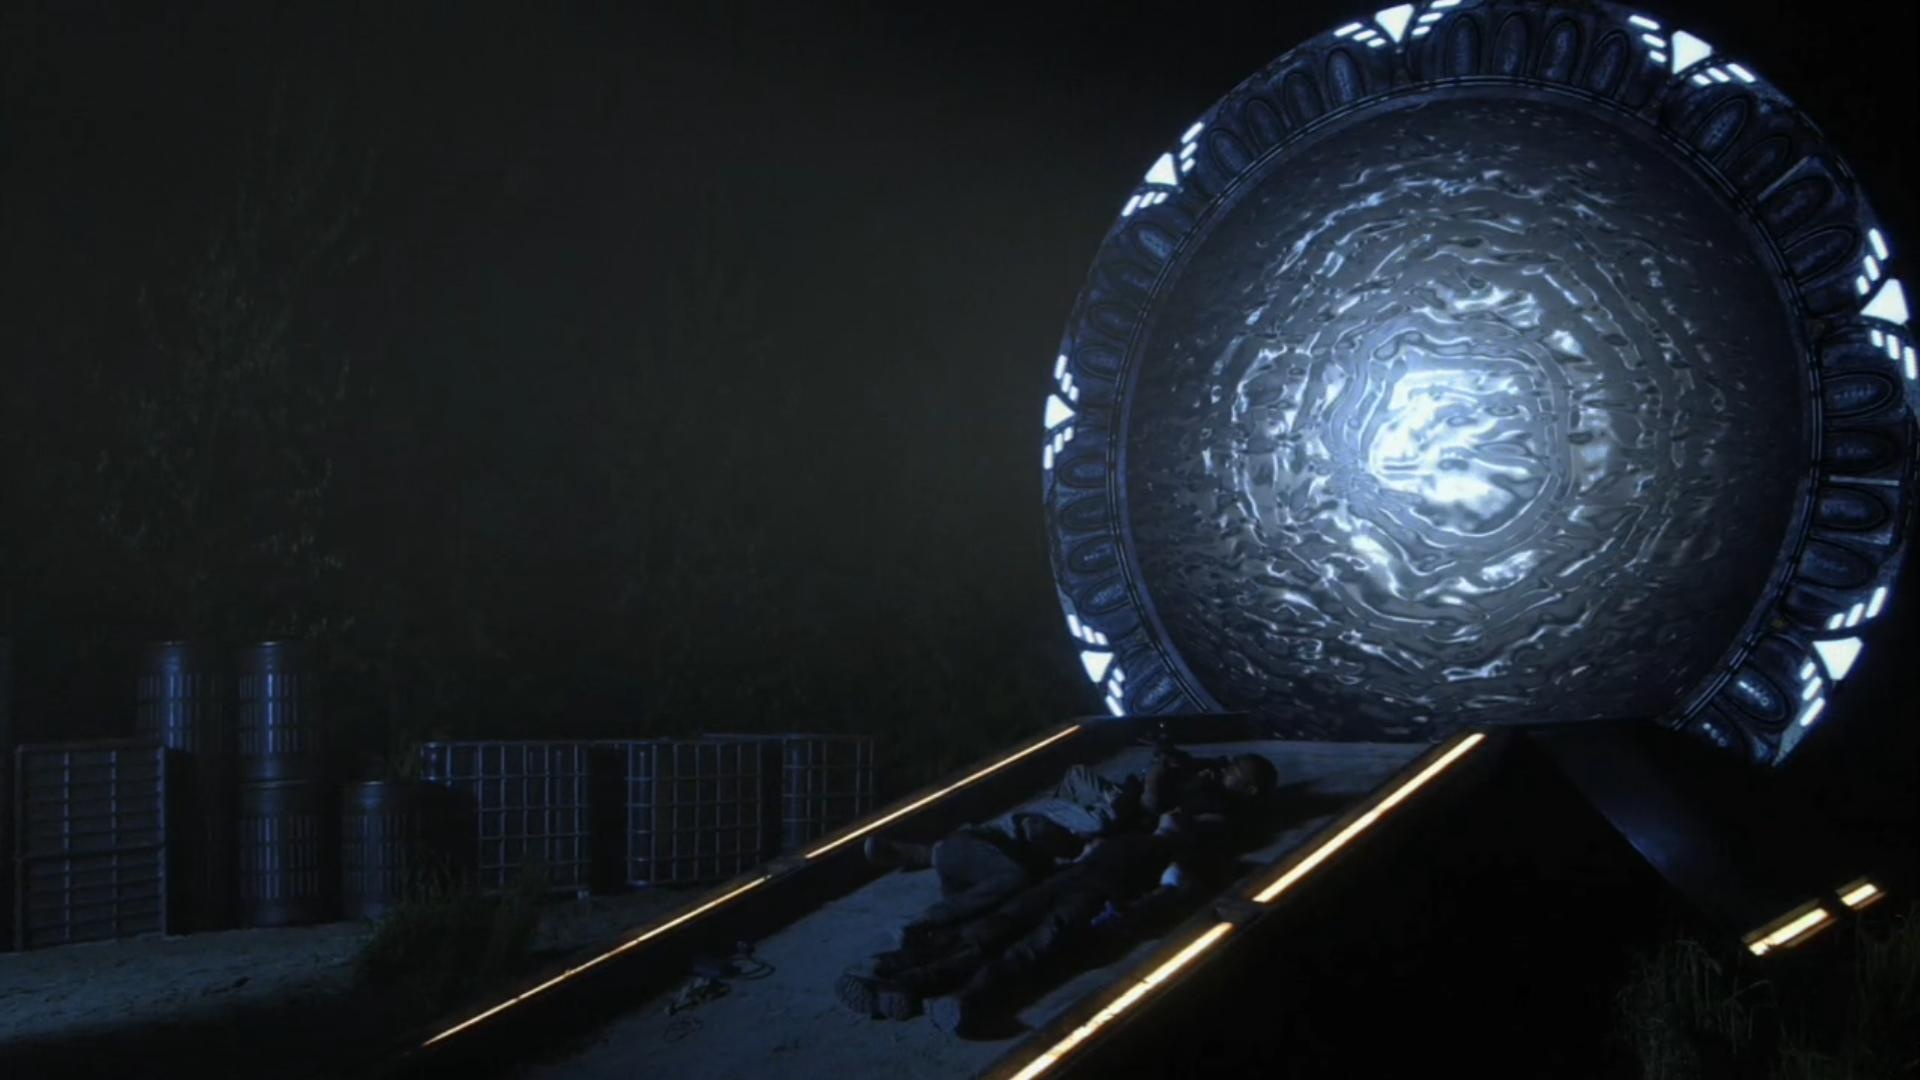 Stargate Movie, HQ wallpapers, 4K pictures, Movie collection, 1920x1080 Full HD Desktop